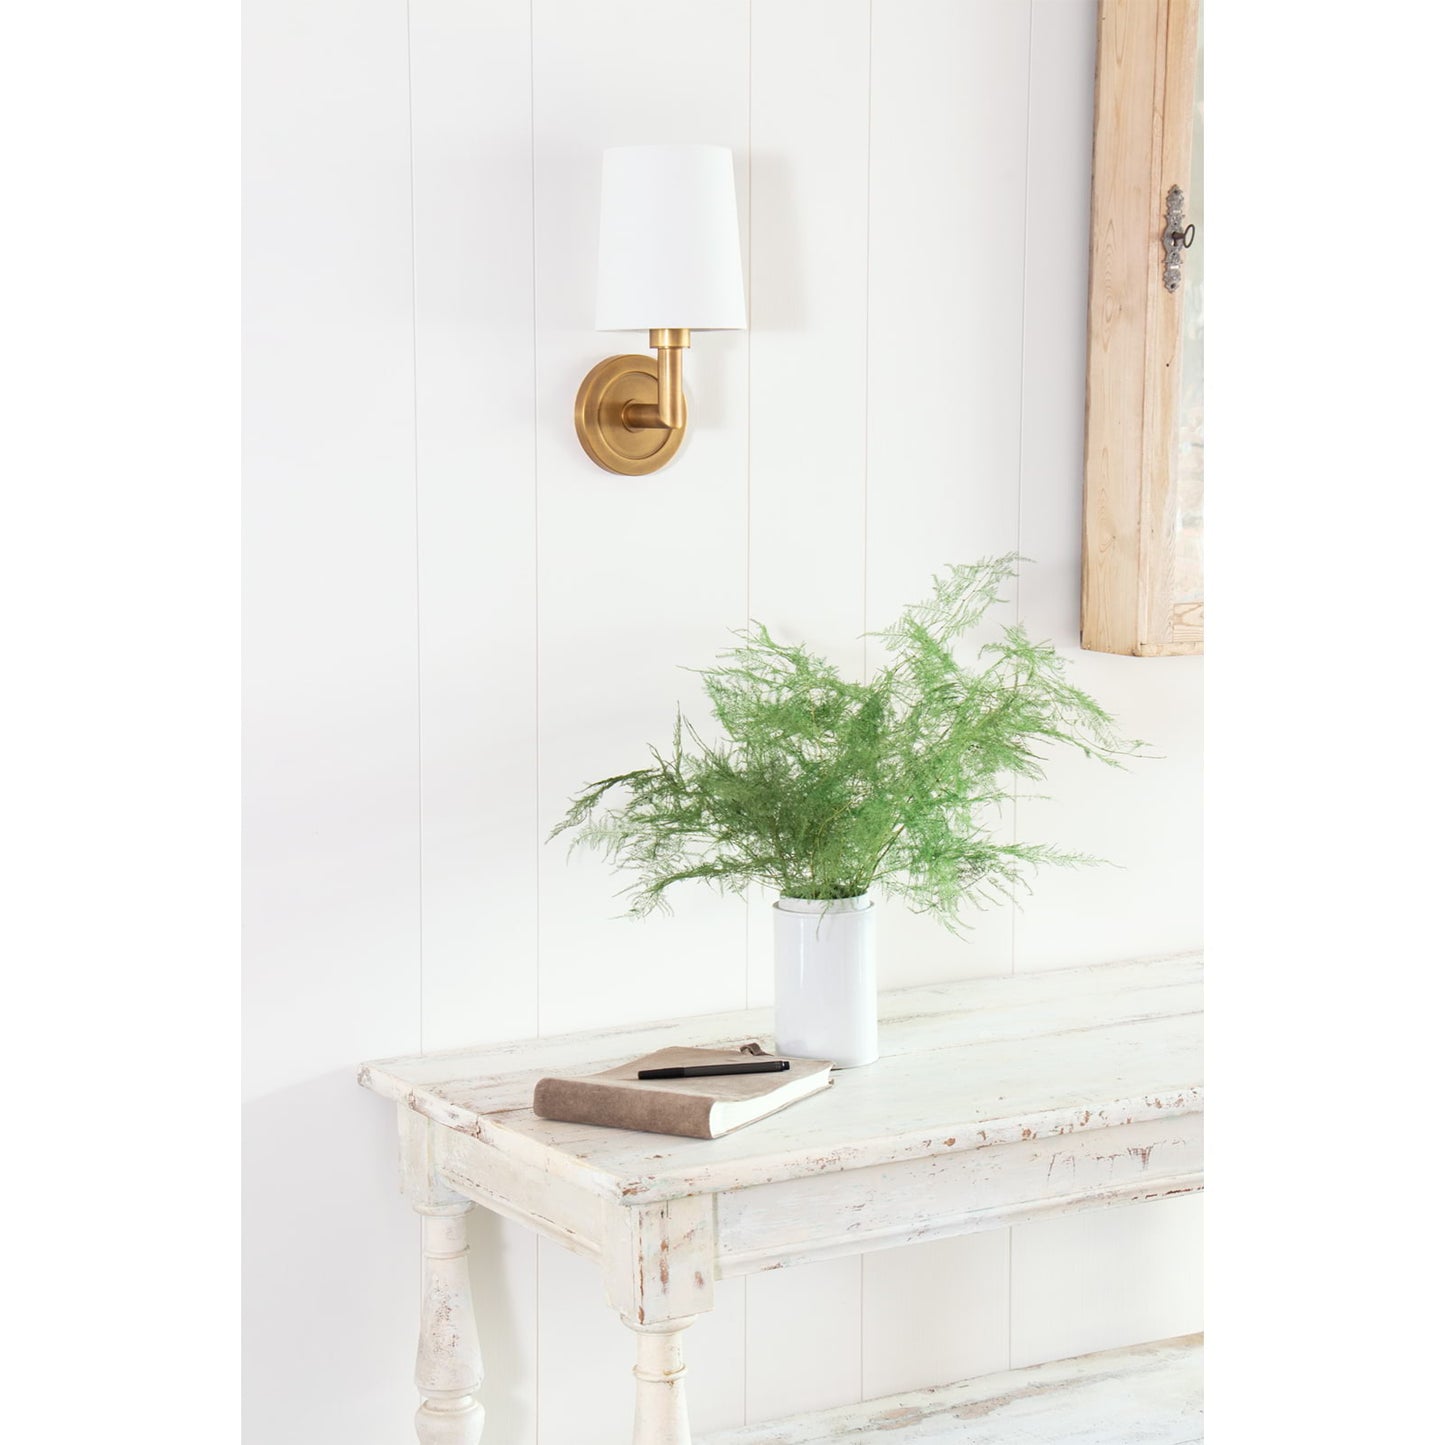 Legend Sconce Single in Natural Brass by Southern Living